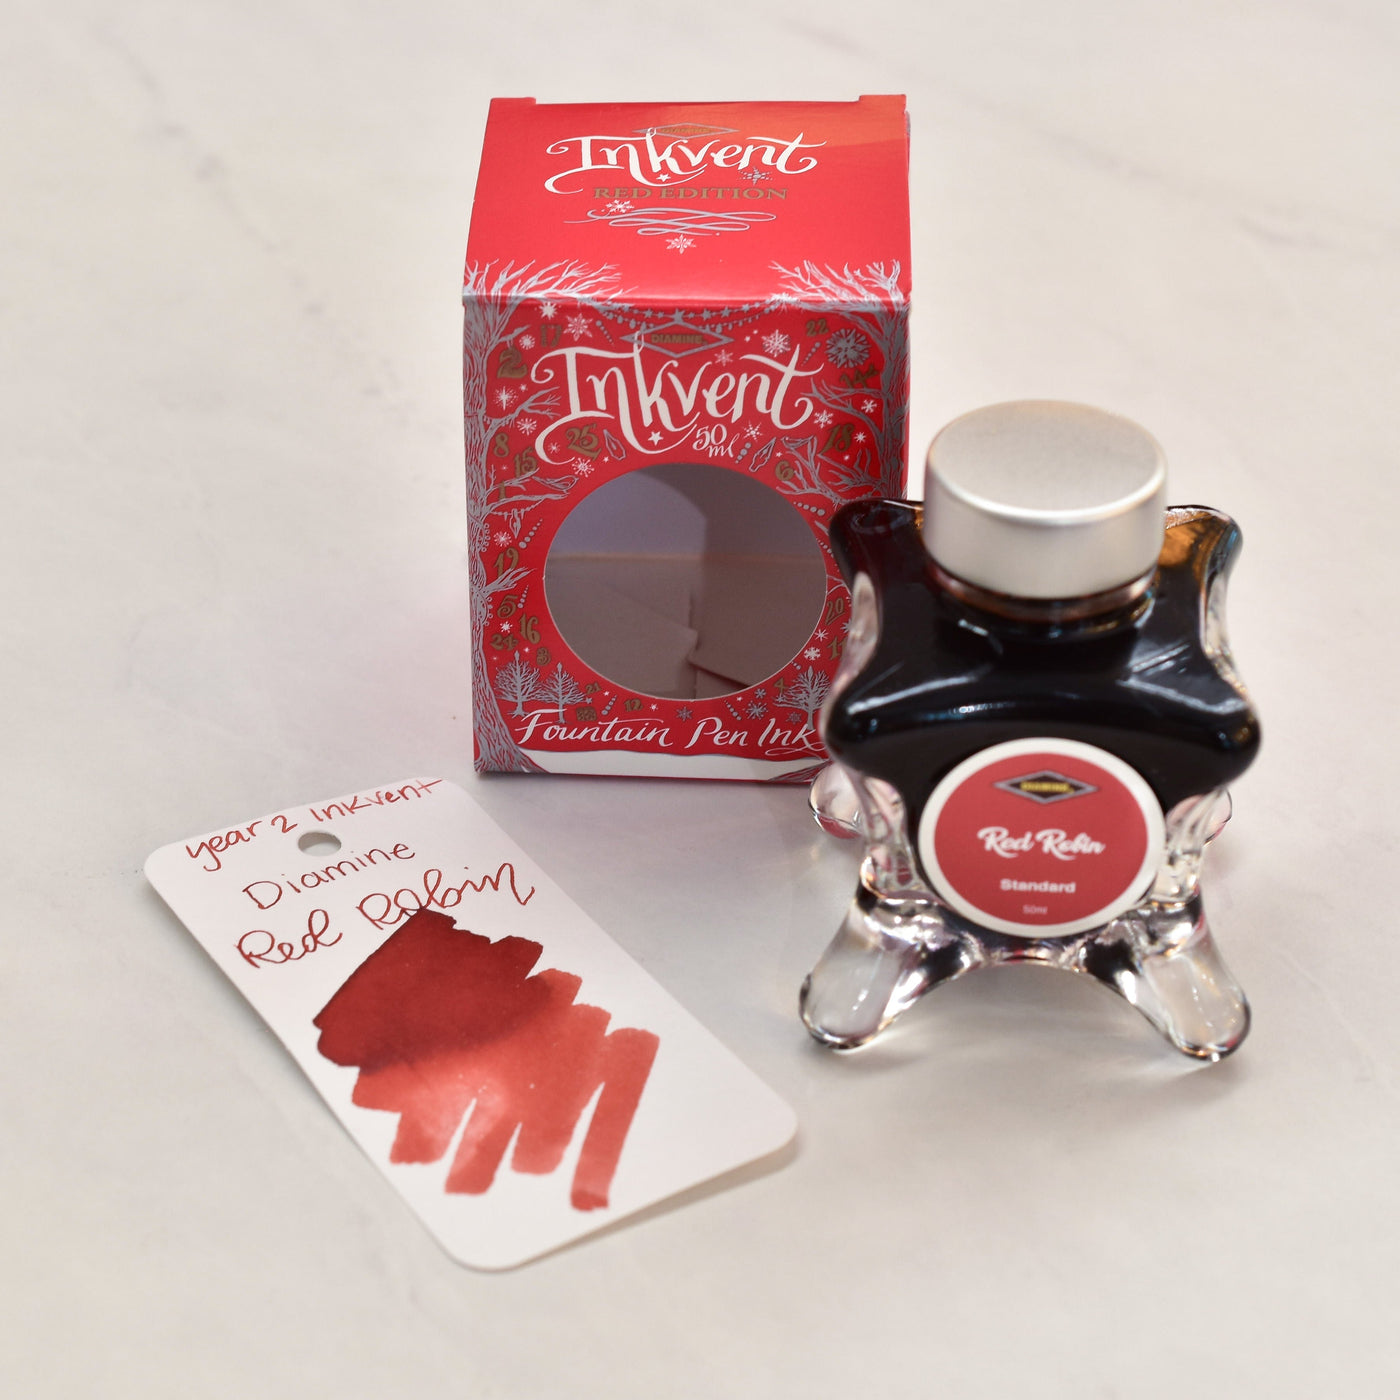 Diamine Inkvent Year 2 Red Robin Fountain Pen Ink Bottle